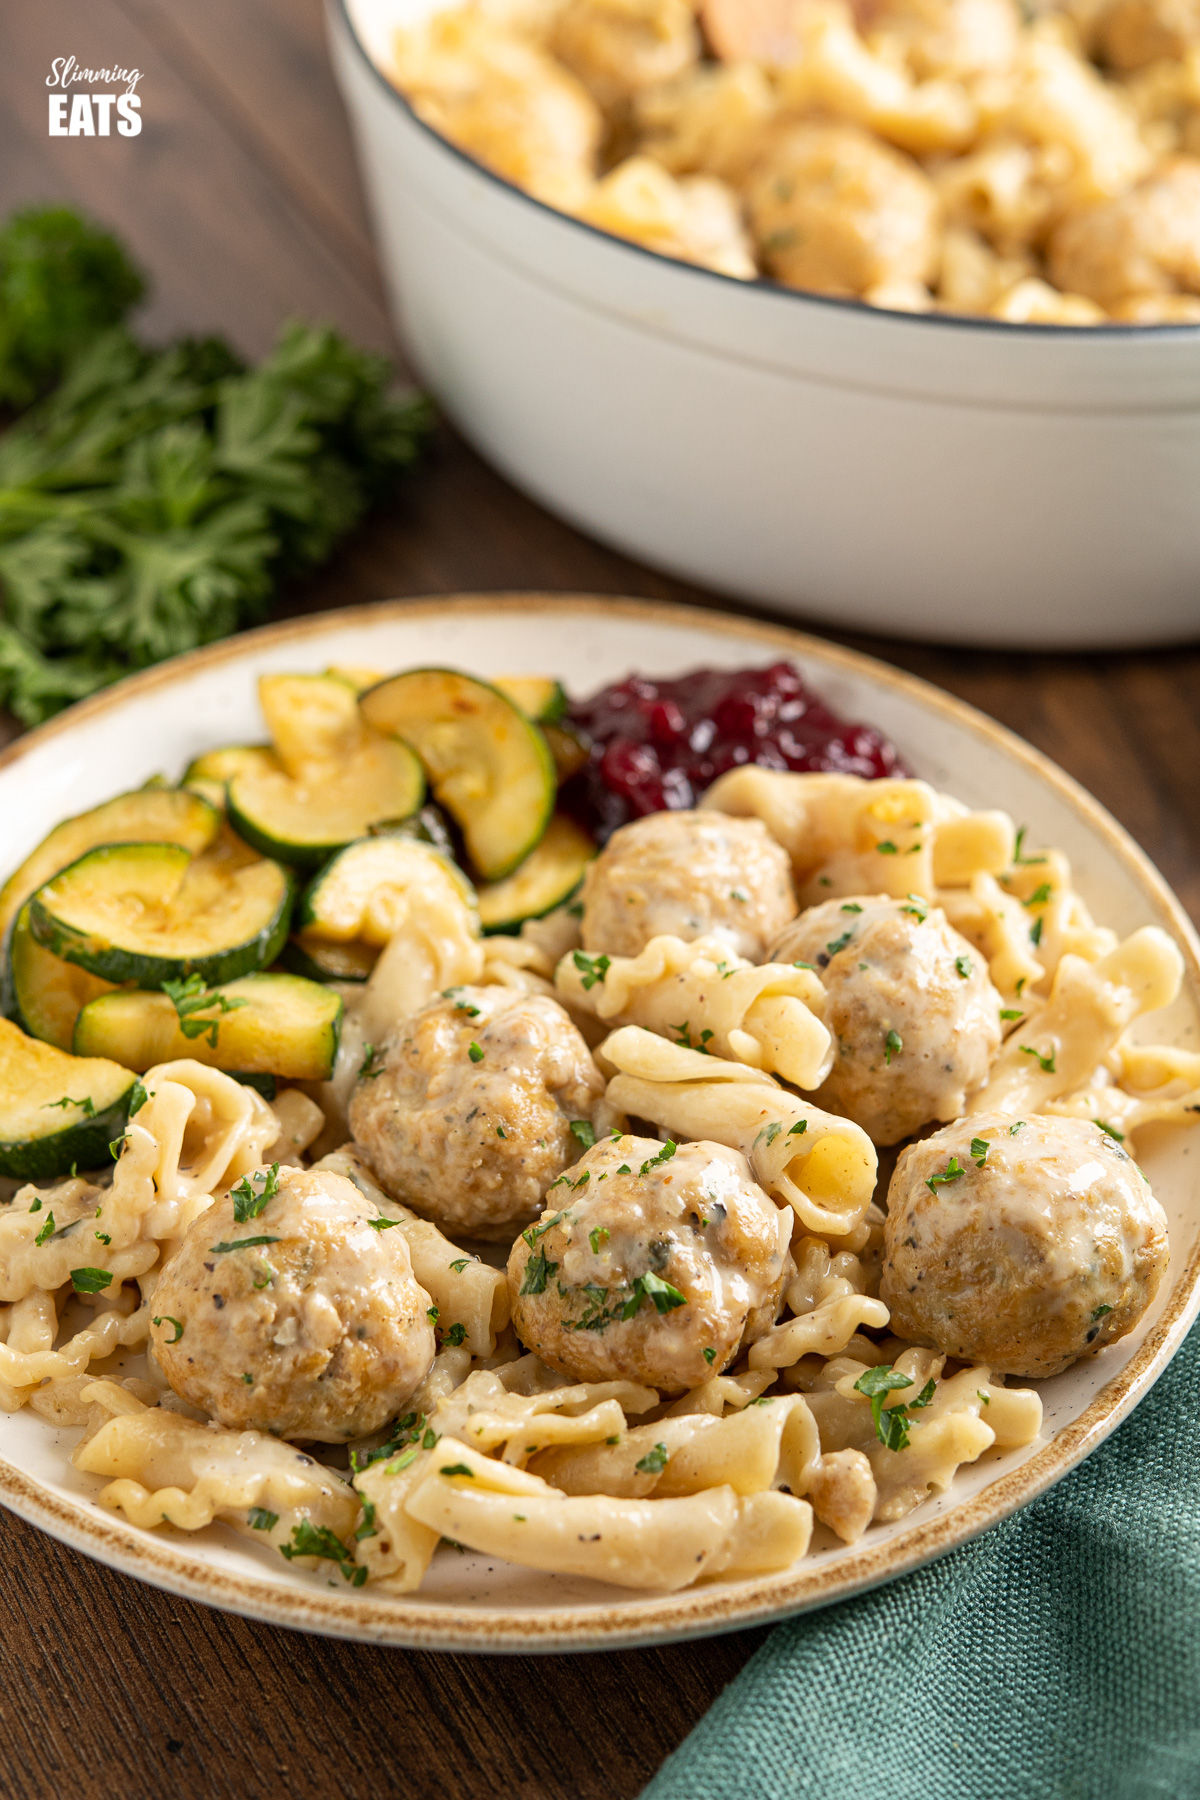 white plate with golden yellow rim dished up with One Pot Turkey Swedish Meatball Pasta sauteed zucchini and lingonberry sauce, pan in background